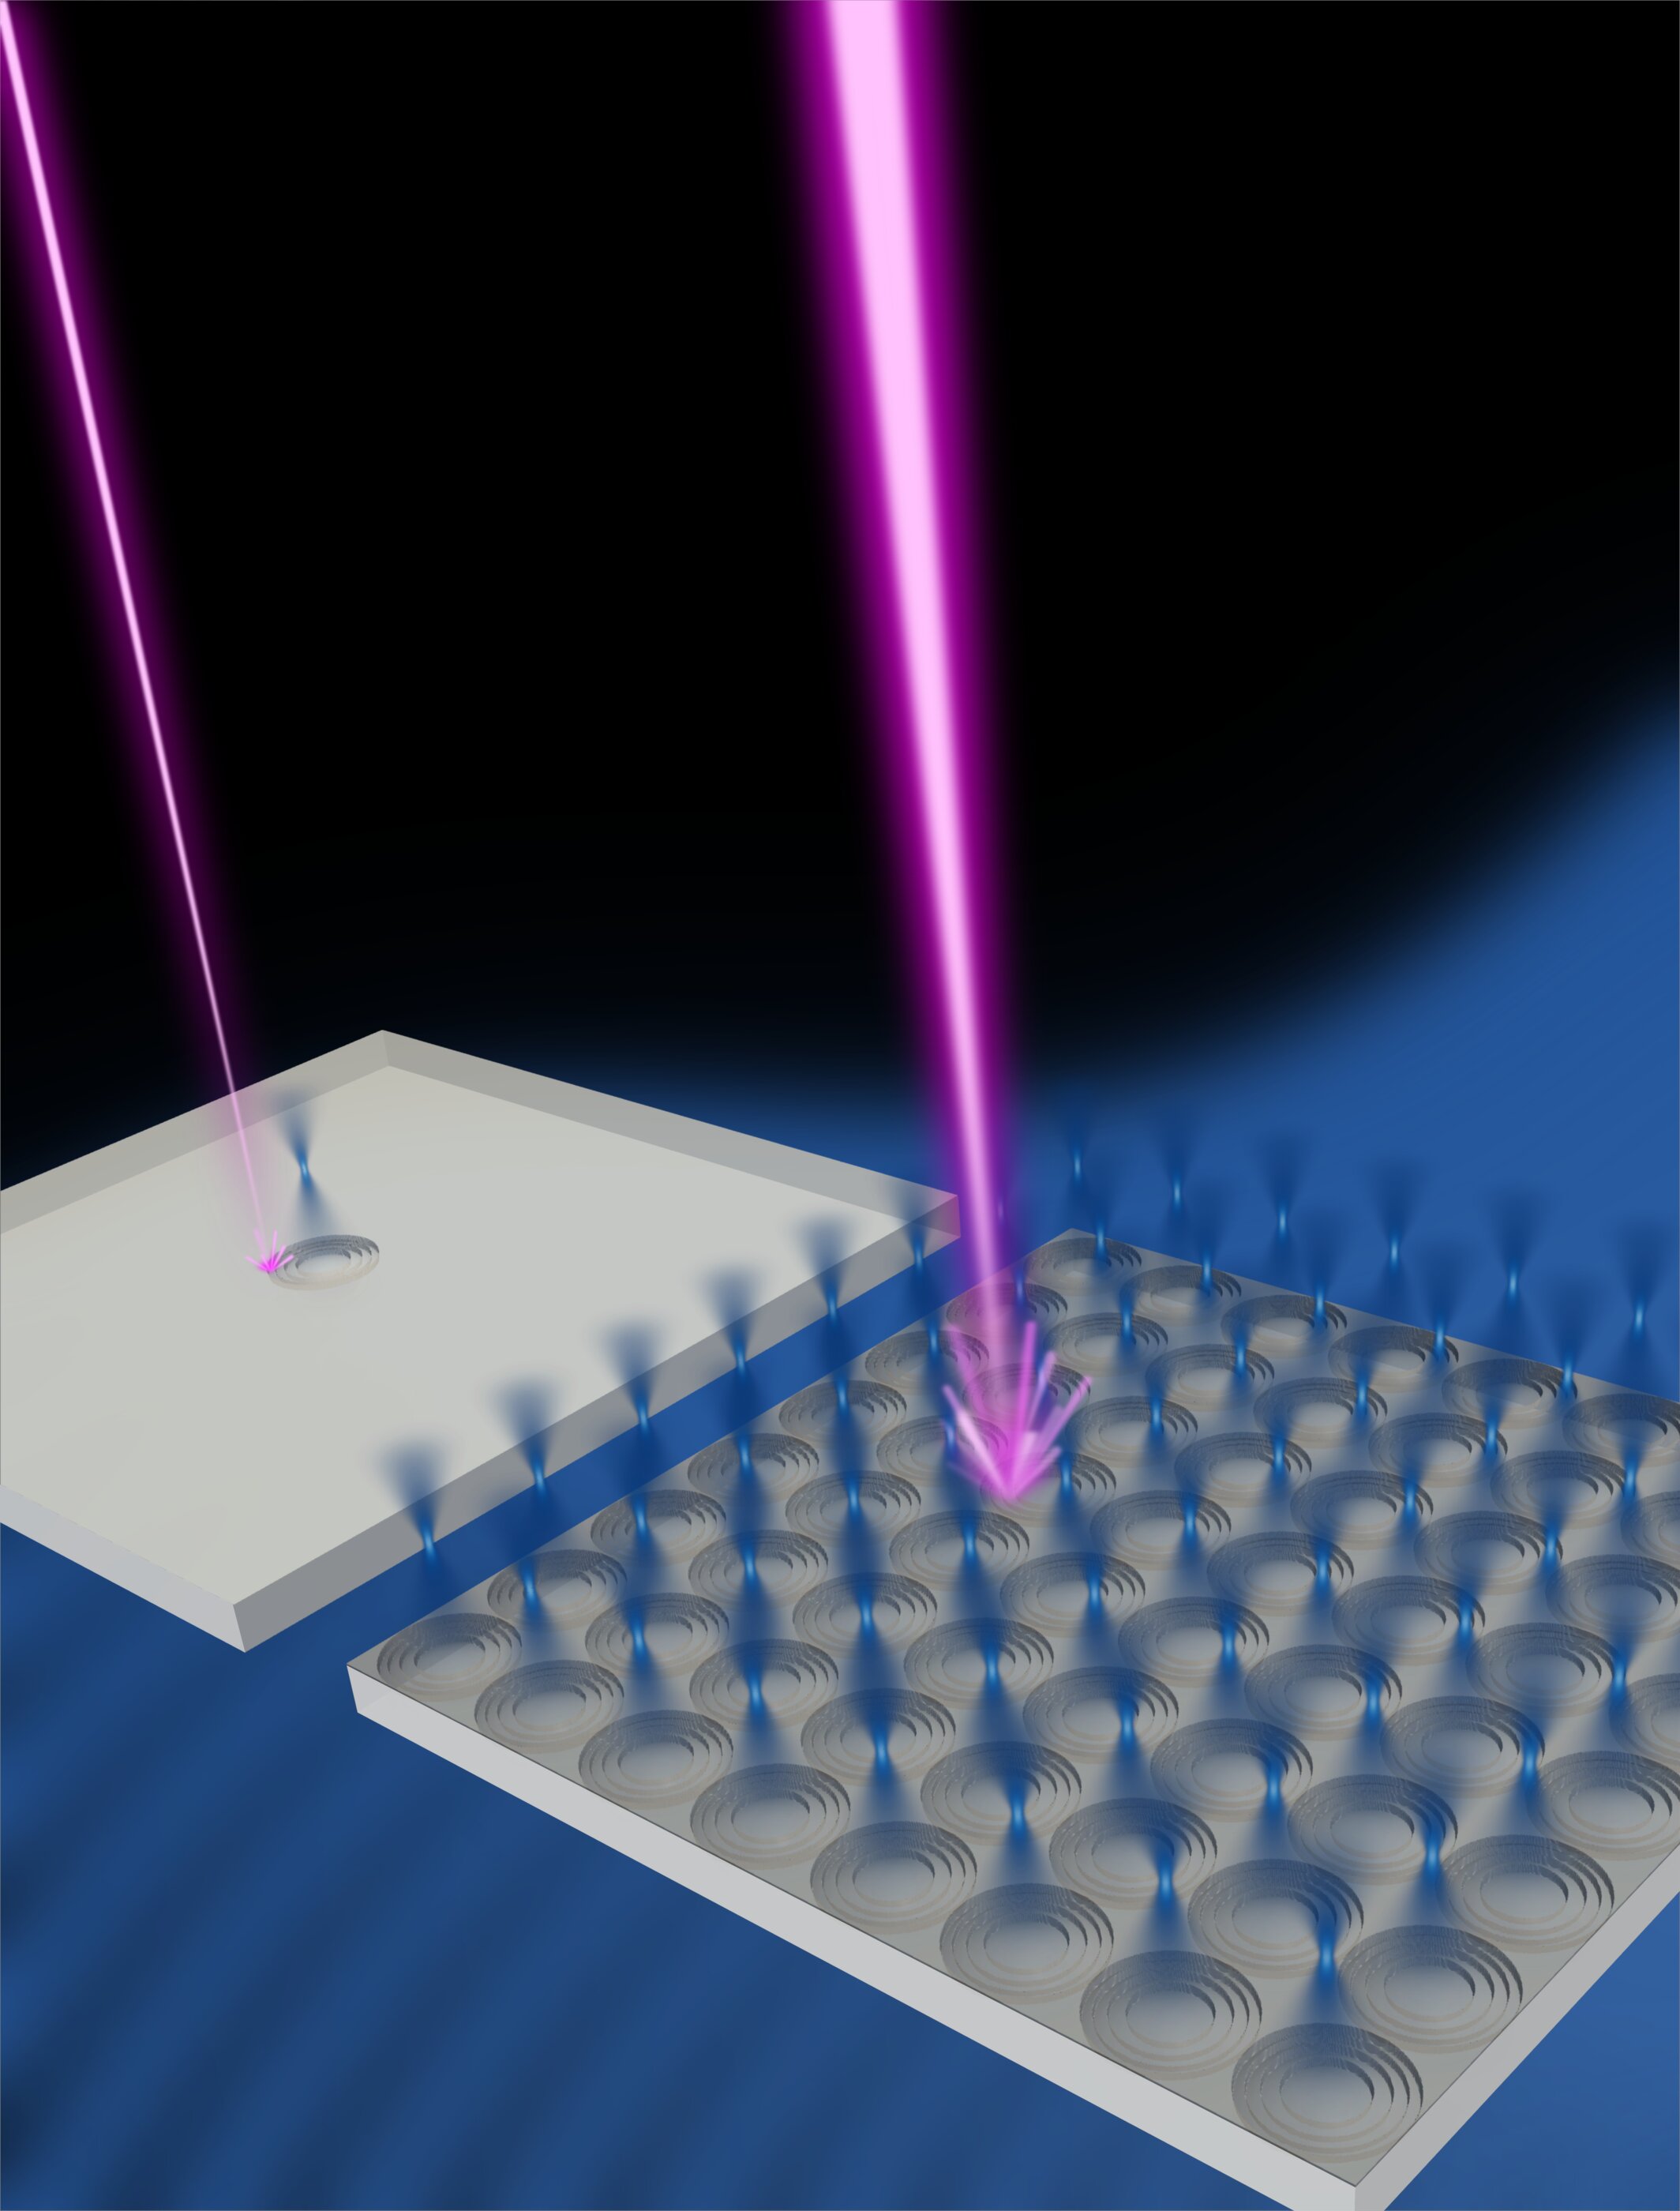 A superfast process for nanoscale machining